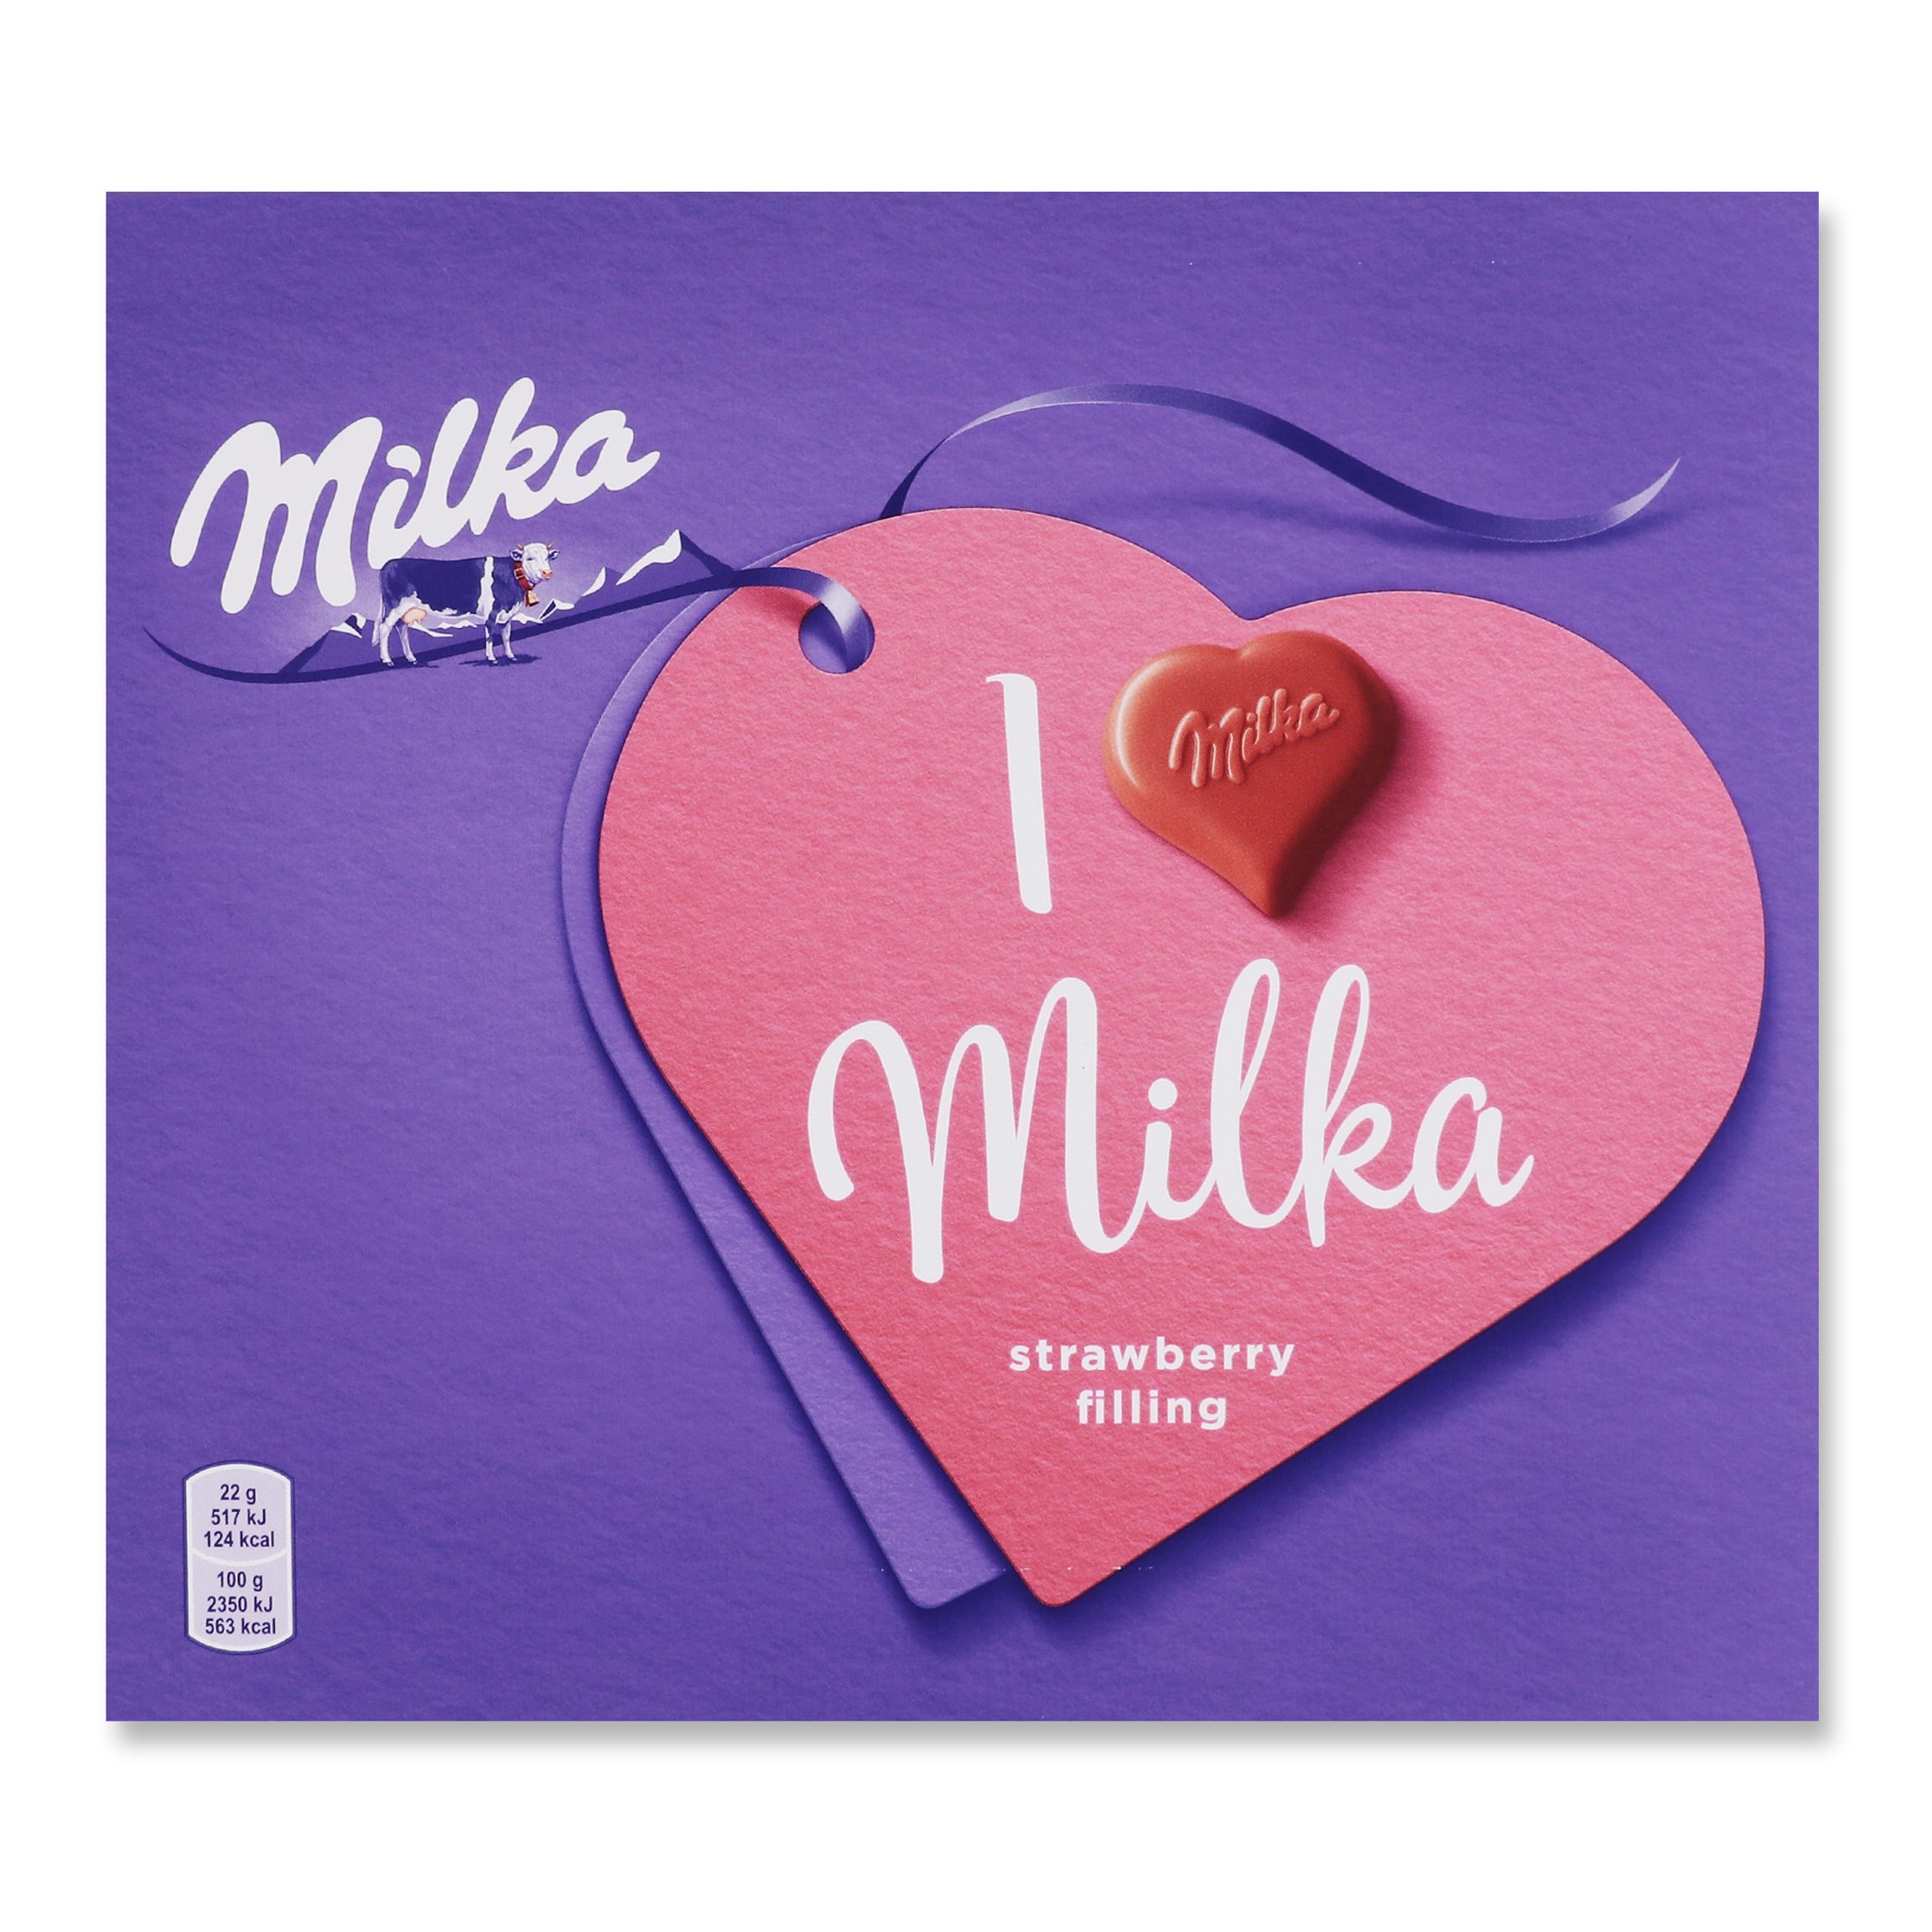 Milka Milk Chocolate Candies with Creamy Strawberry Filling 110g